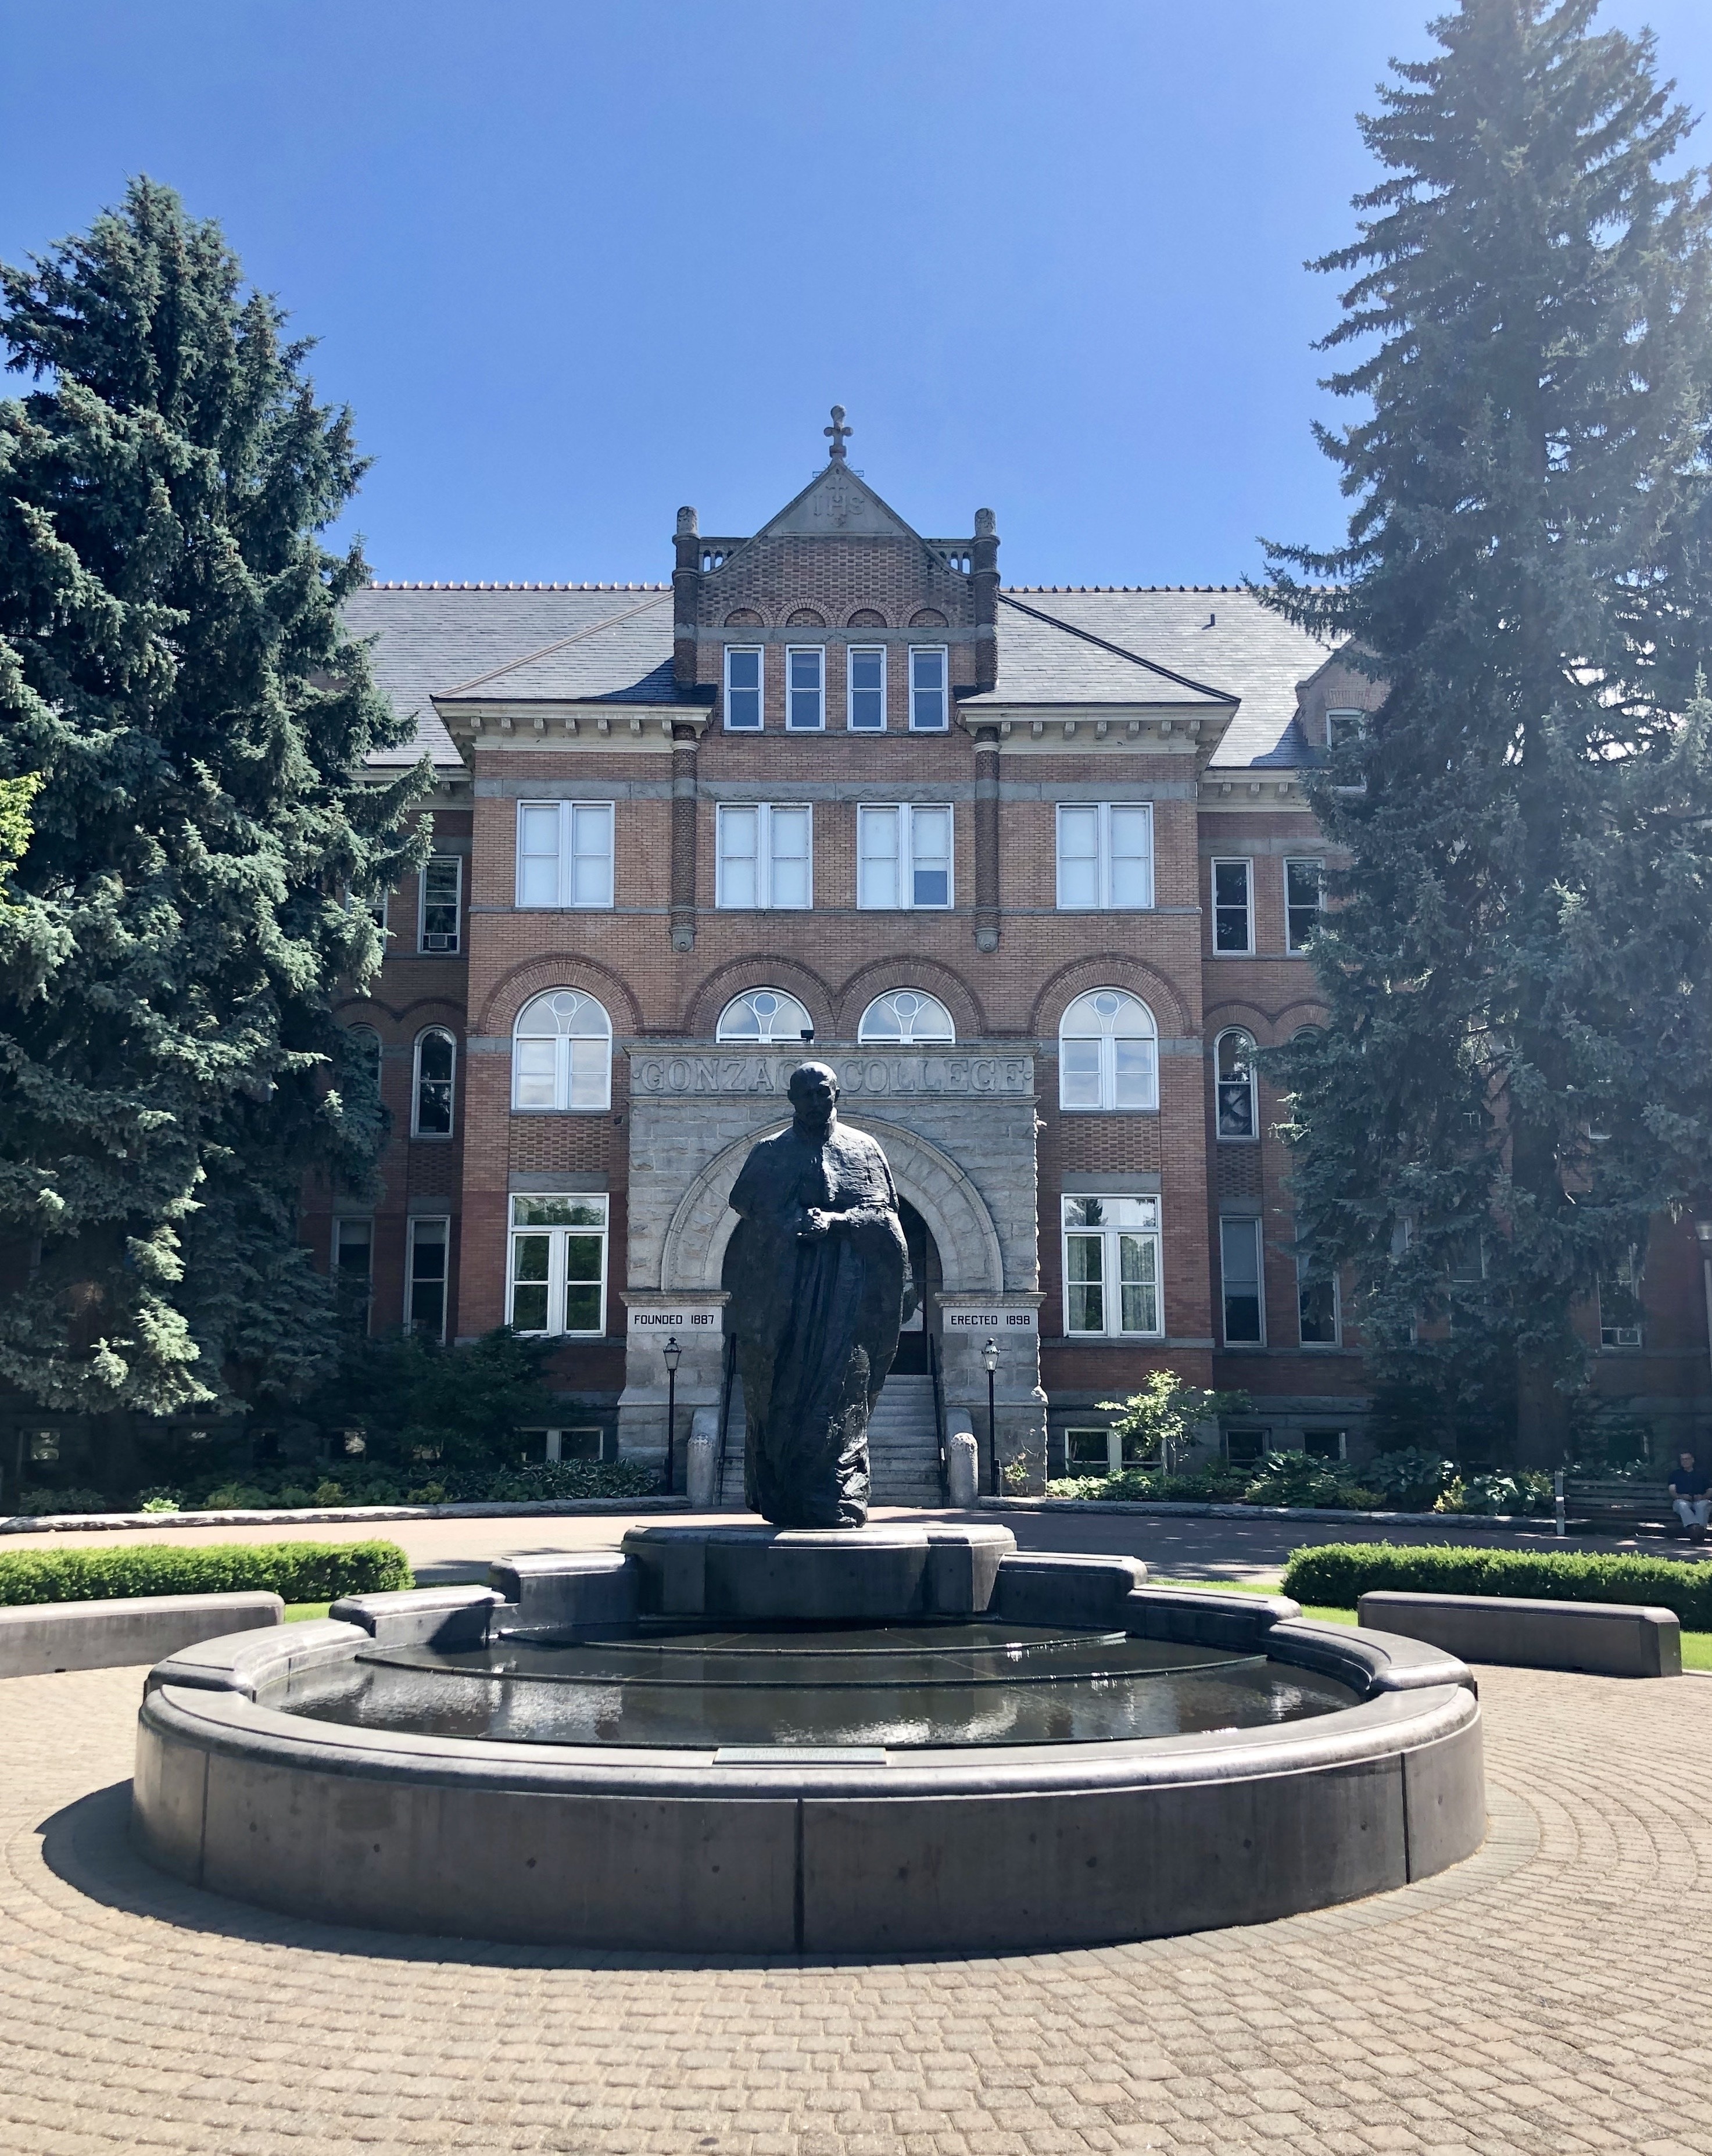 Founded In 1887 by Father Joseph Cataldo, an Italian born Jesuit, he named the new school after his fellow Jesuit and fellow Italian, St. Aloysius Gonzaga.